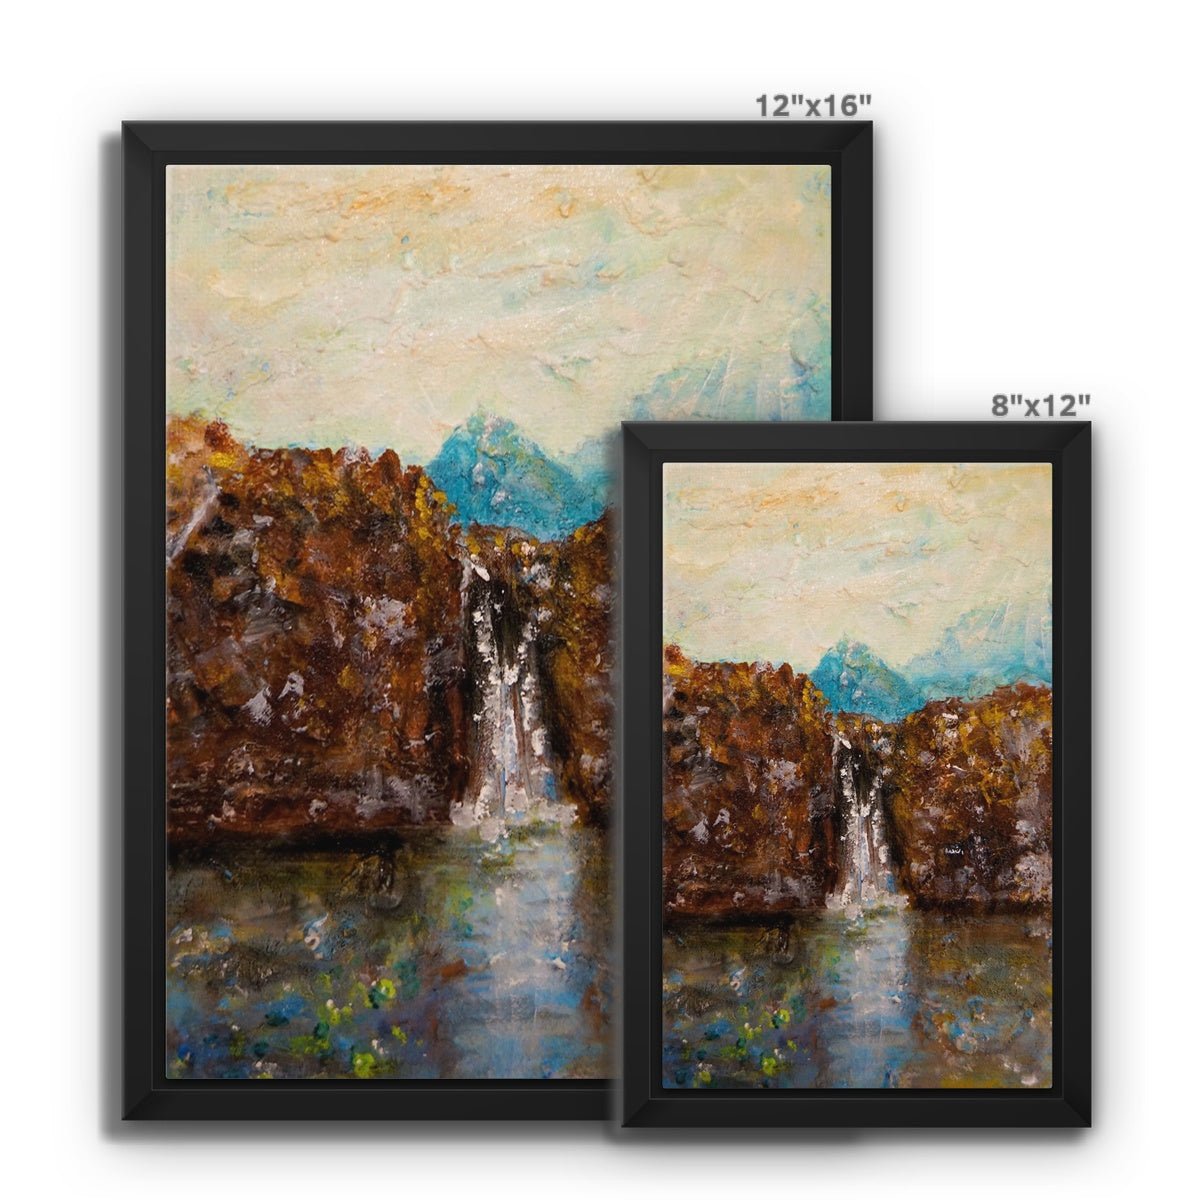 Skye Fairy Pools Painting | Framed Canvas From Scotland-Floating Framed Canvas Prints-Skye Art Gallery-Paintings, Prints, Homeware, Art Gifts From Scotland By Scottish Artist Kevin Hunter